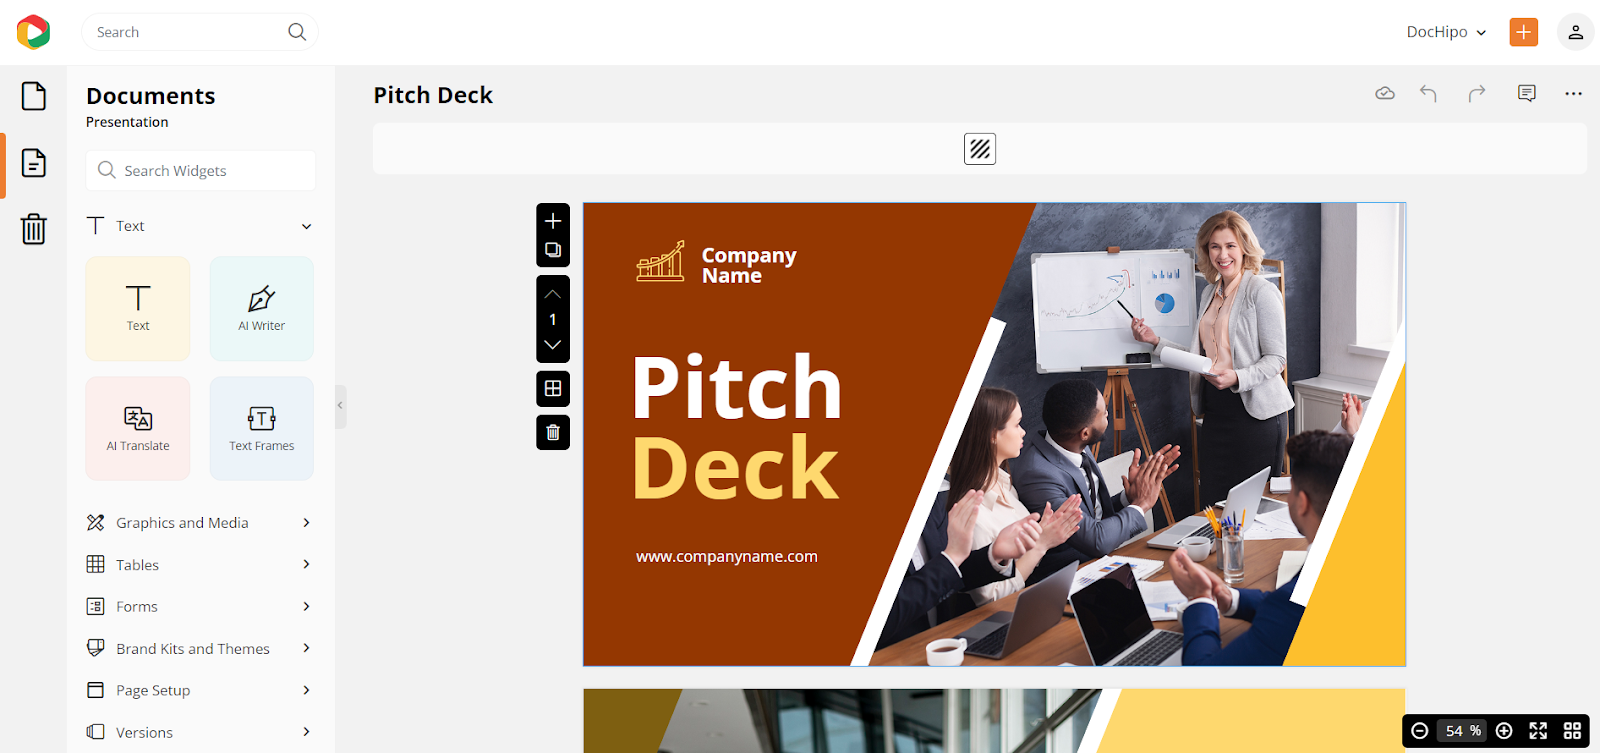 Pitch deck template